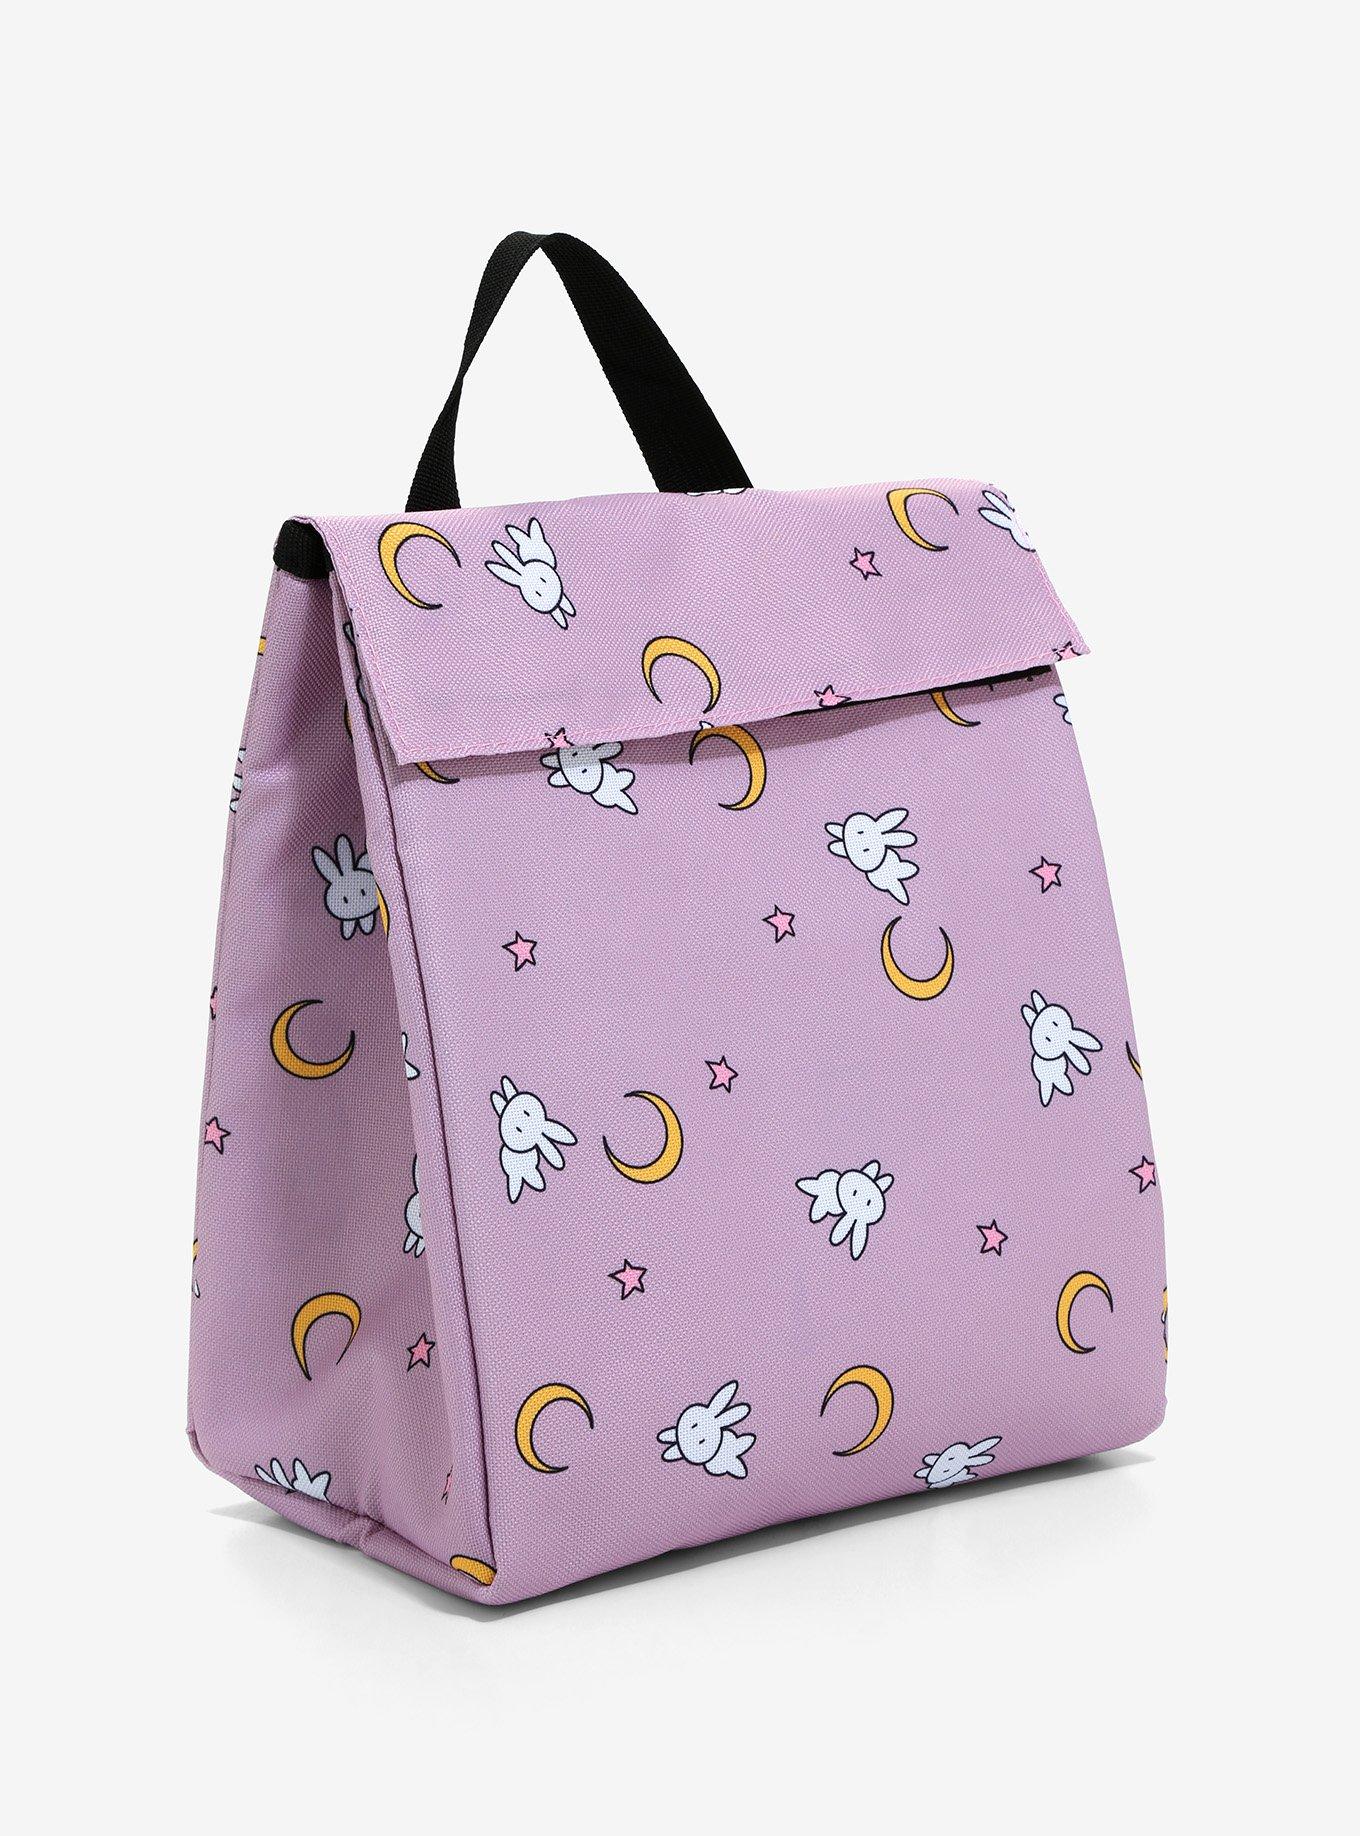 Sailor Moon Lunch Bag Box Anime I'll punish you in the name of the